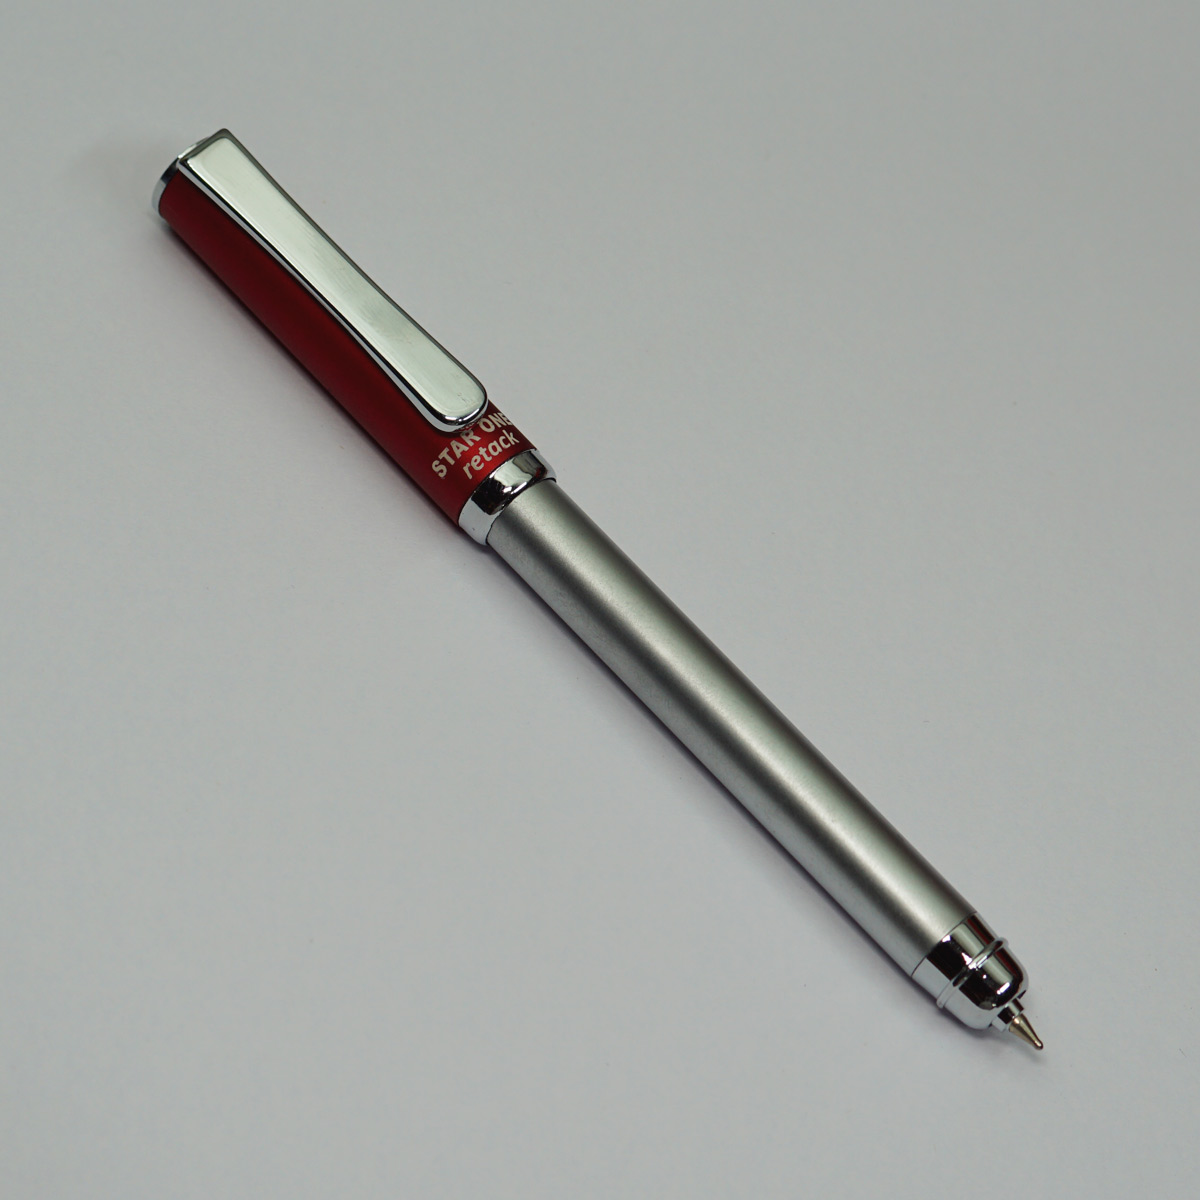 Star One Silver Color Body With Red Cap Fine Tip Pull And Push Type Ball Pen SKU 22947